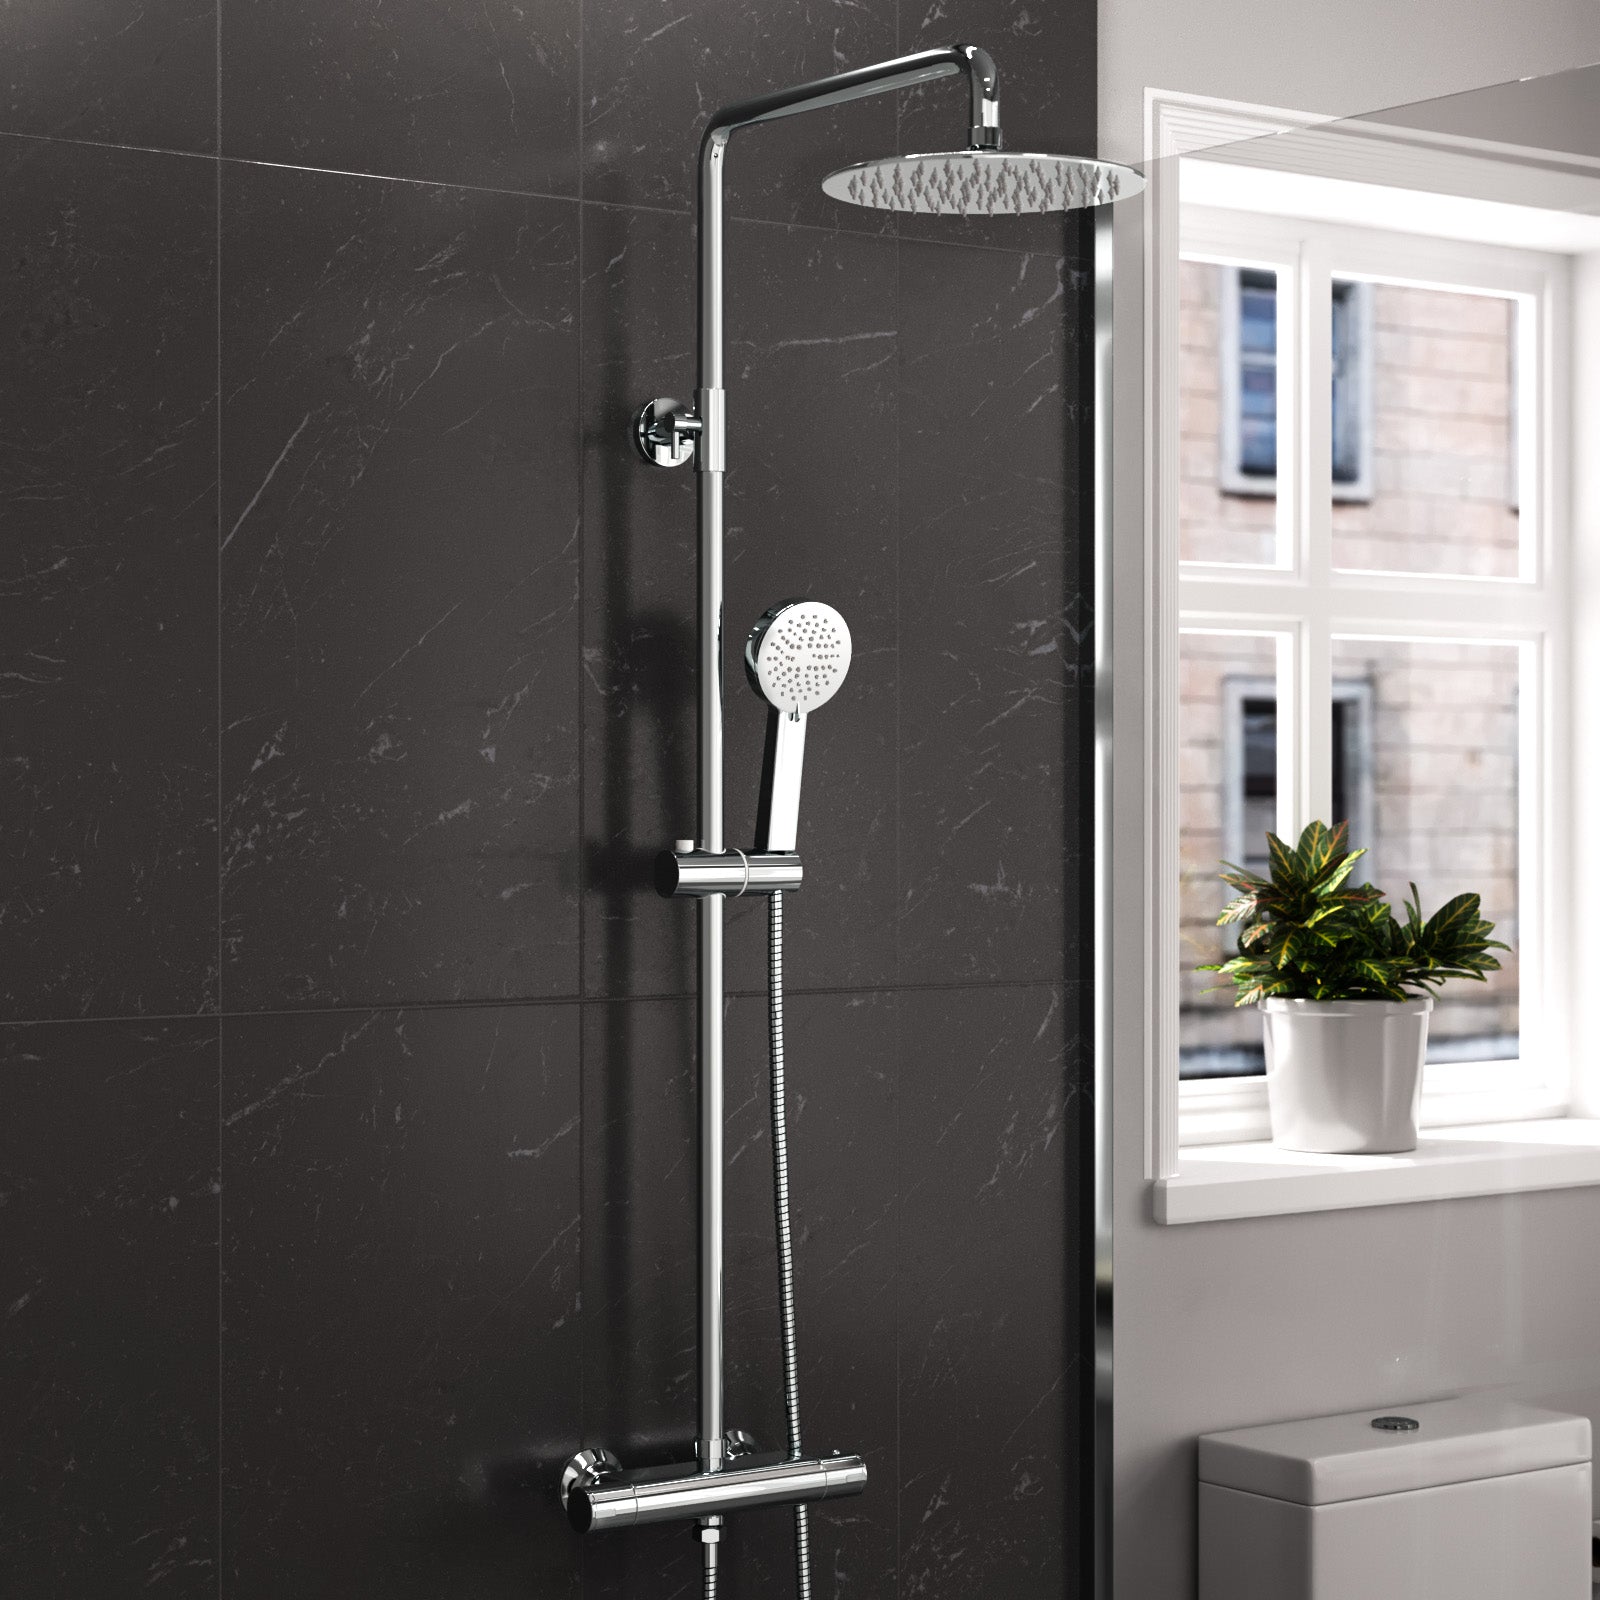 Modern Round Exposed Thermostatic Mixer Shower Set With Shower Head and Handheld